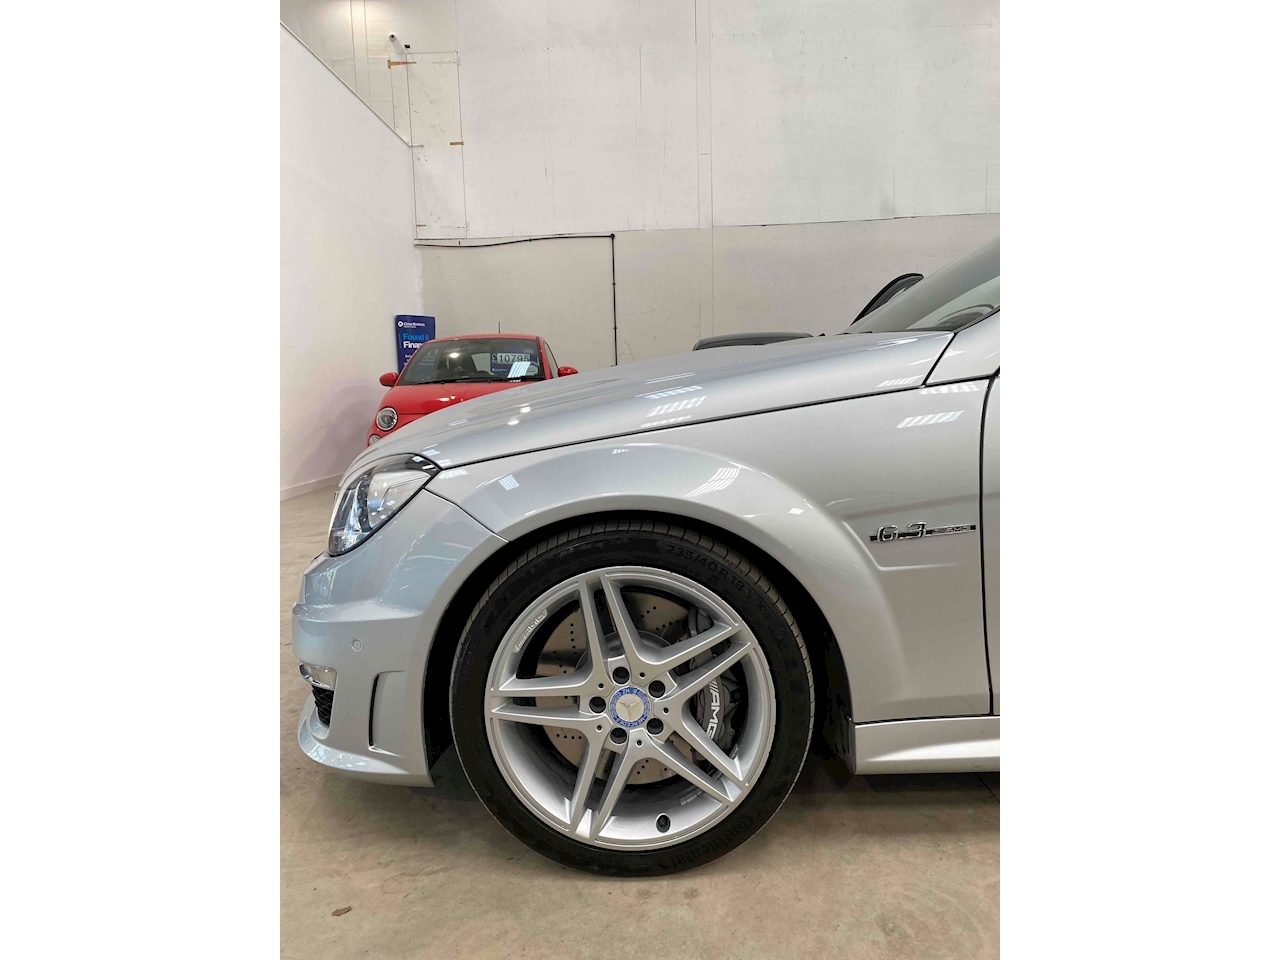 Used 2013 Mercedes-Benz C Class C63 Amg Edition 6.3 4dr Saloon Automatic  Petrol For Sale in West Sussex